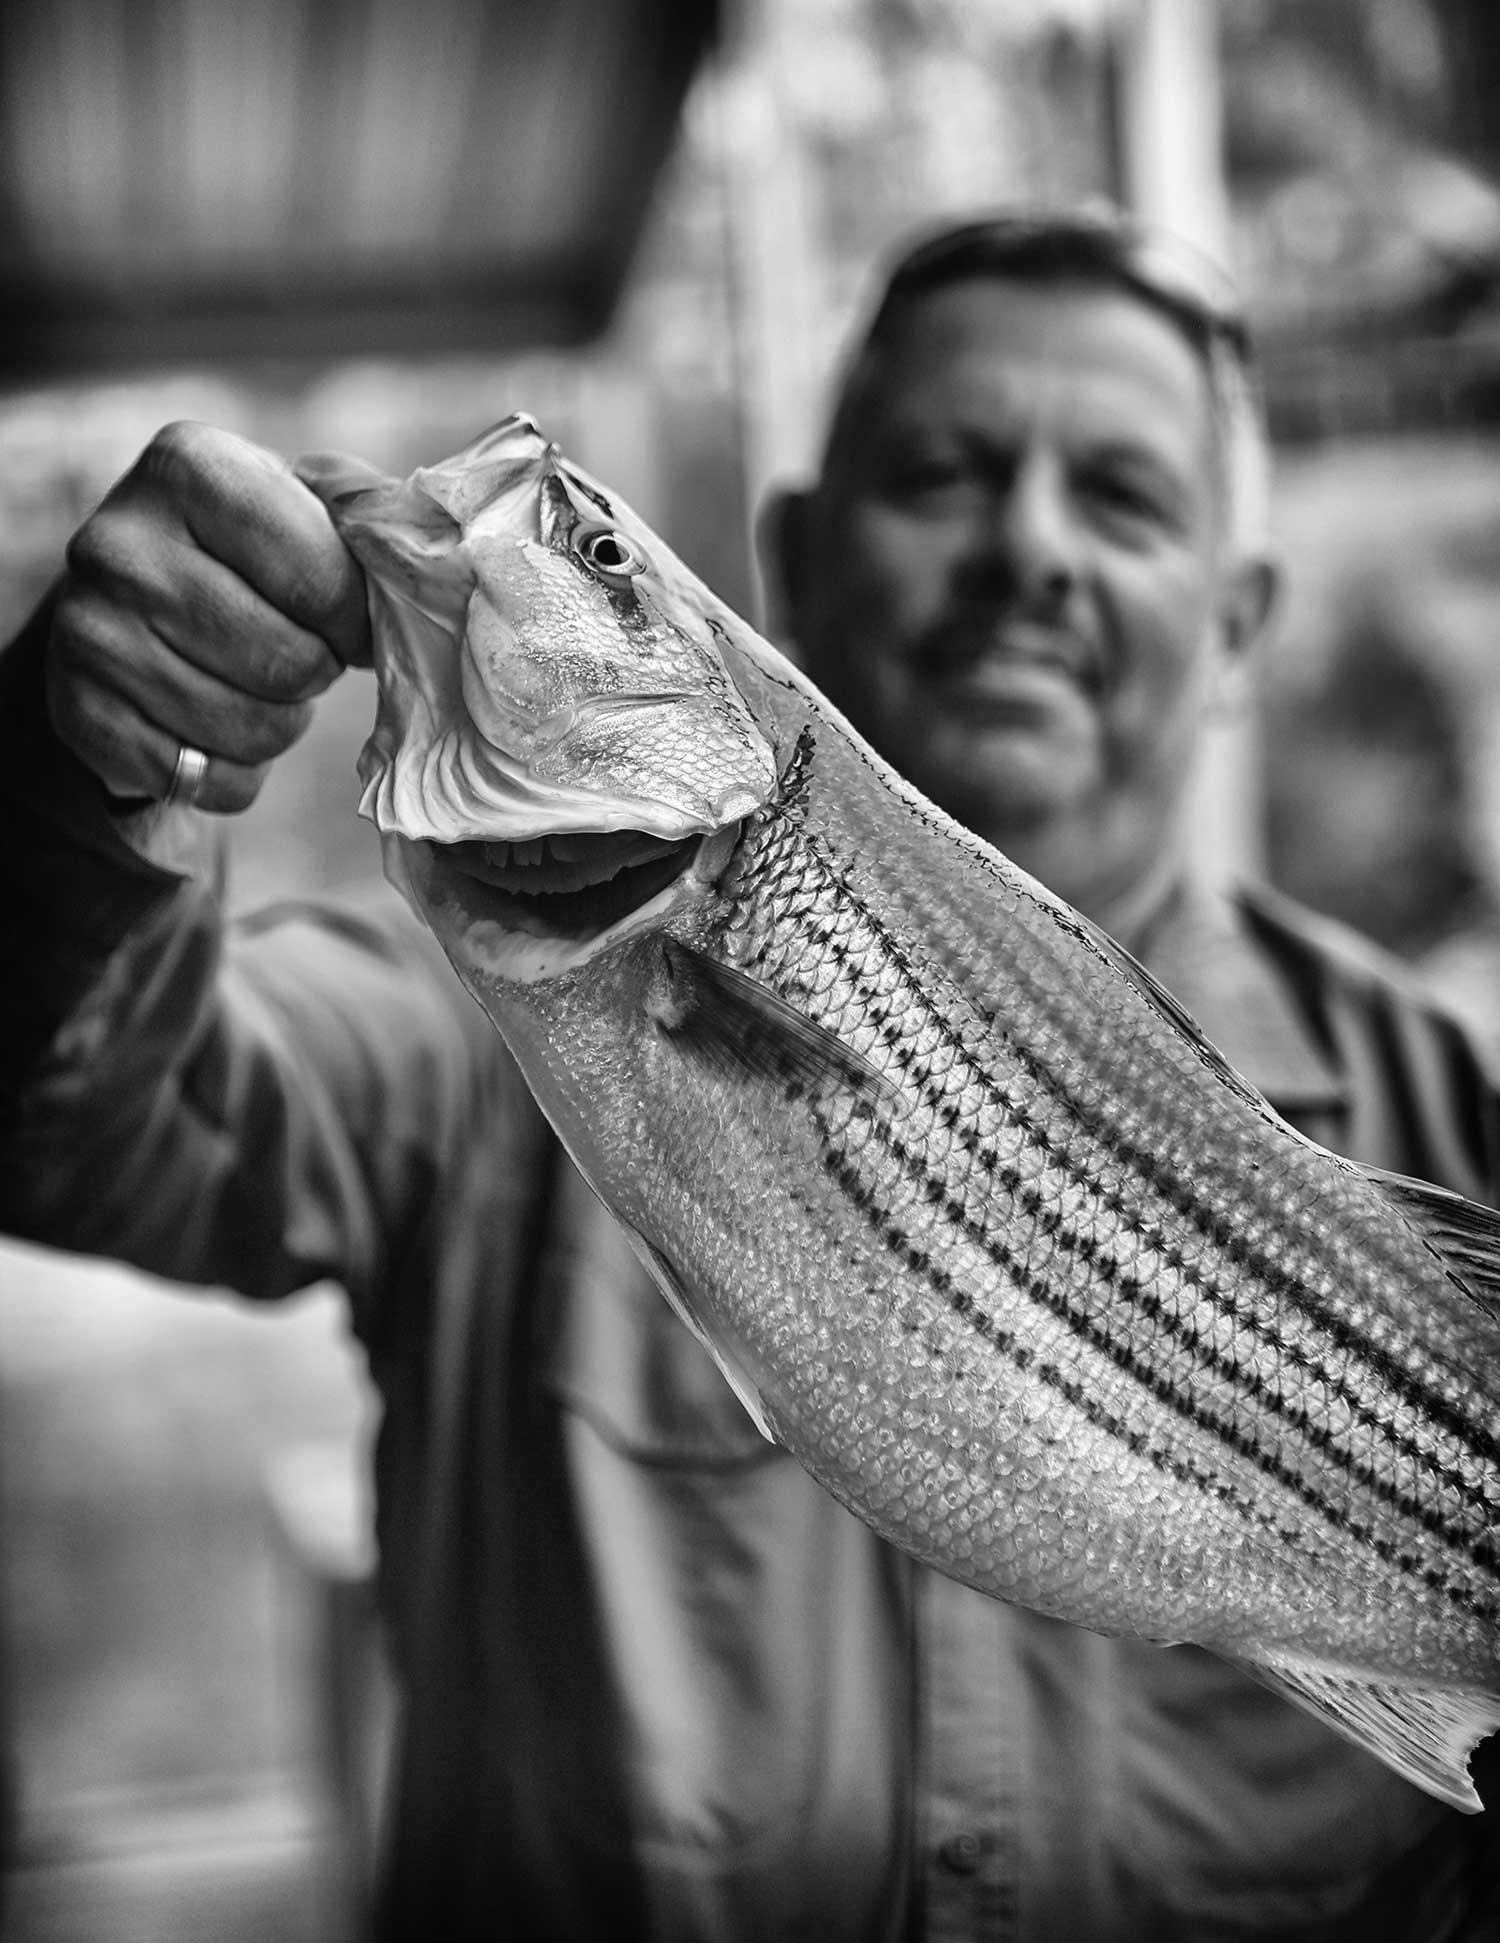 Randy Corbitt of Cincinnati, Ohio, holds up a striper fish after his annual fishing trip on Norris Lake with his son, RJ. photo by Kellie Ward - 2019